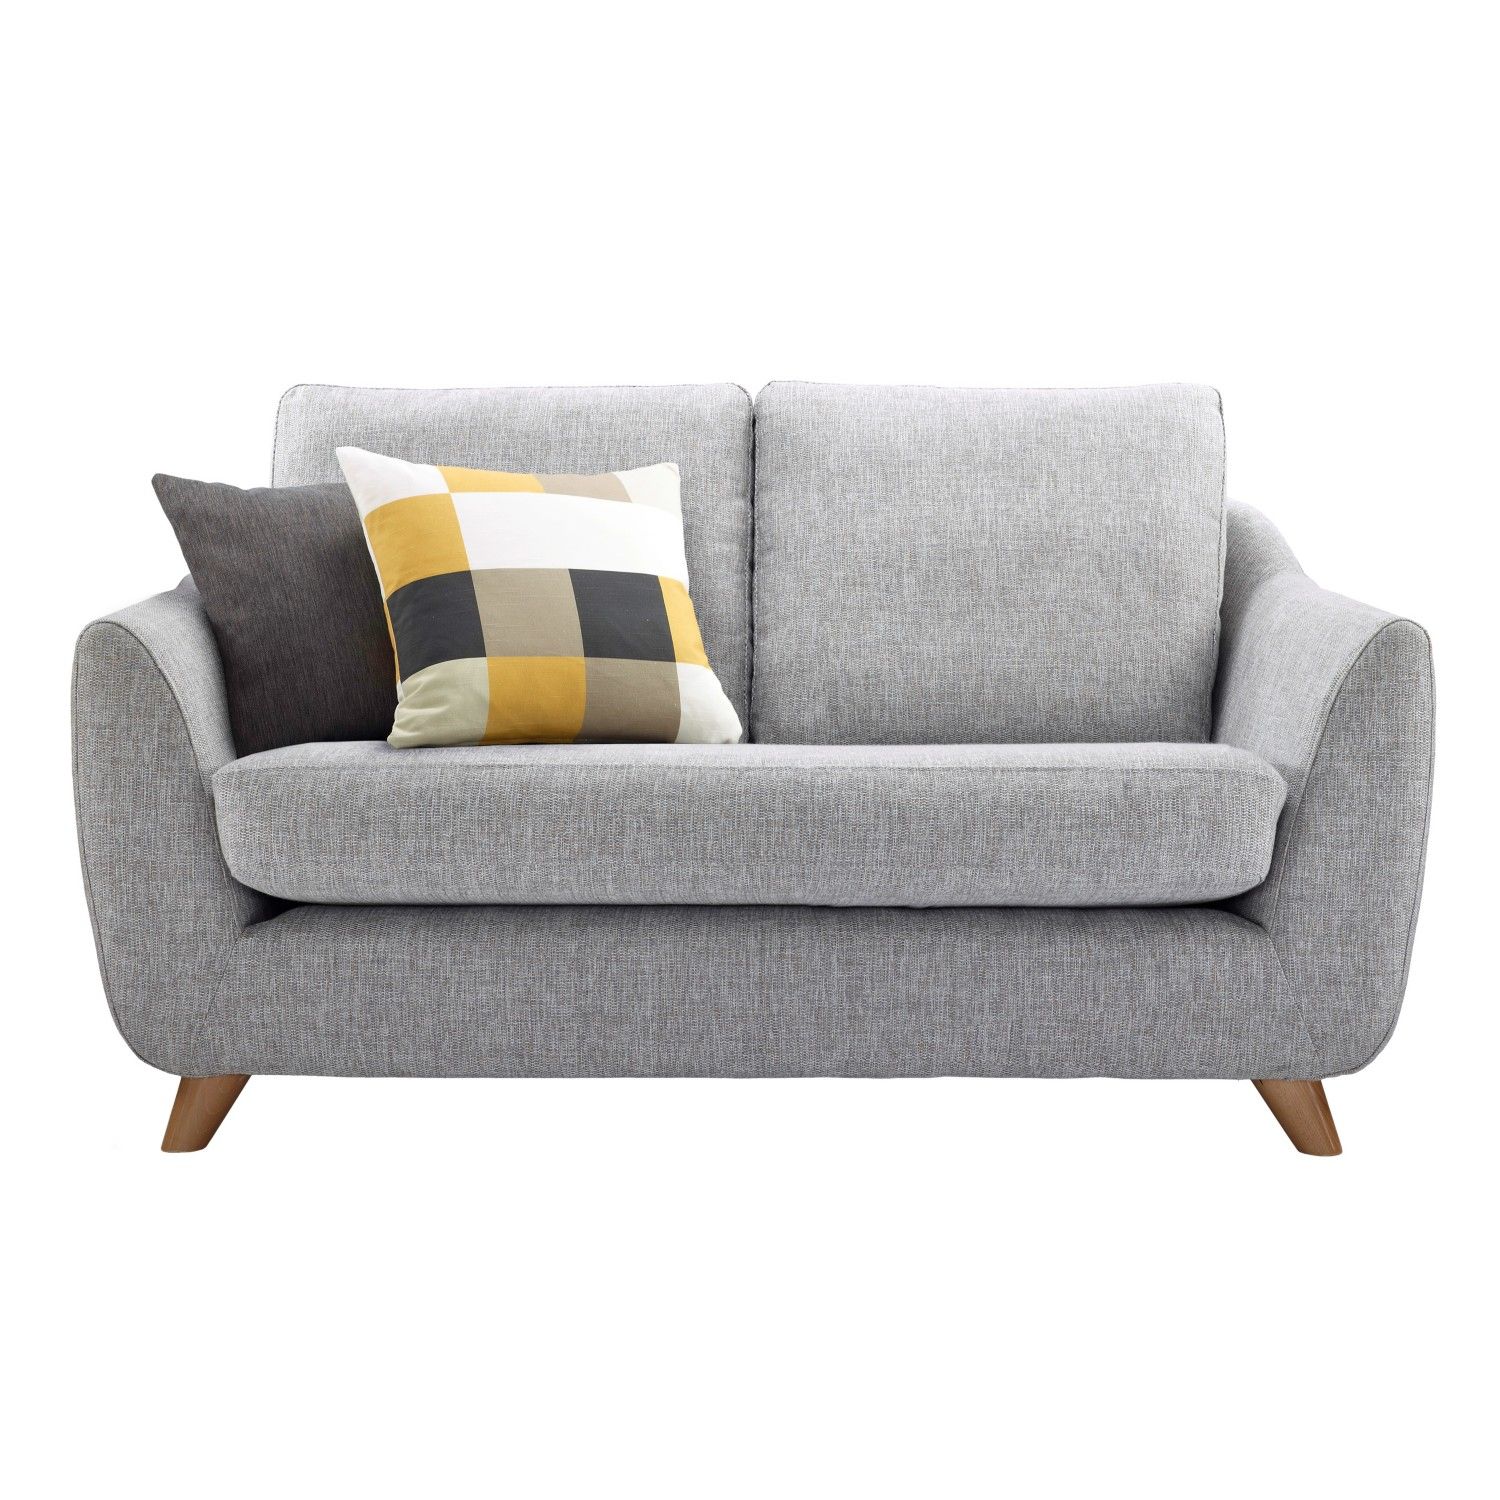 small sofa bed loveseats for small spaces | cheap small sofa decoration : fascinating grey XOEBEWD